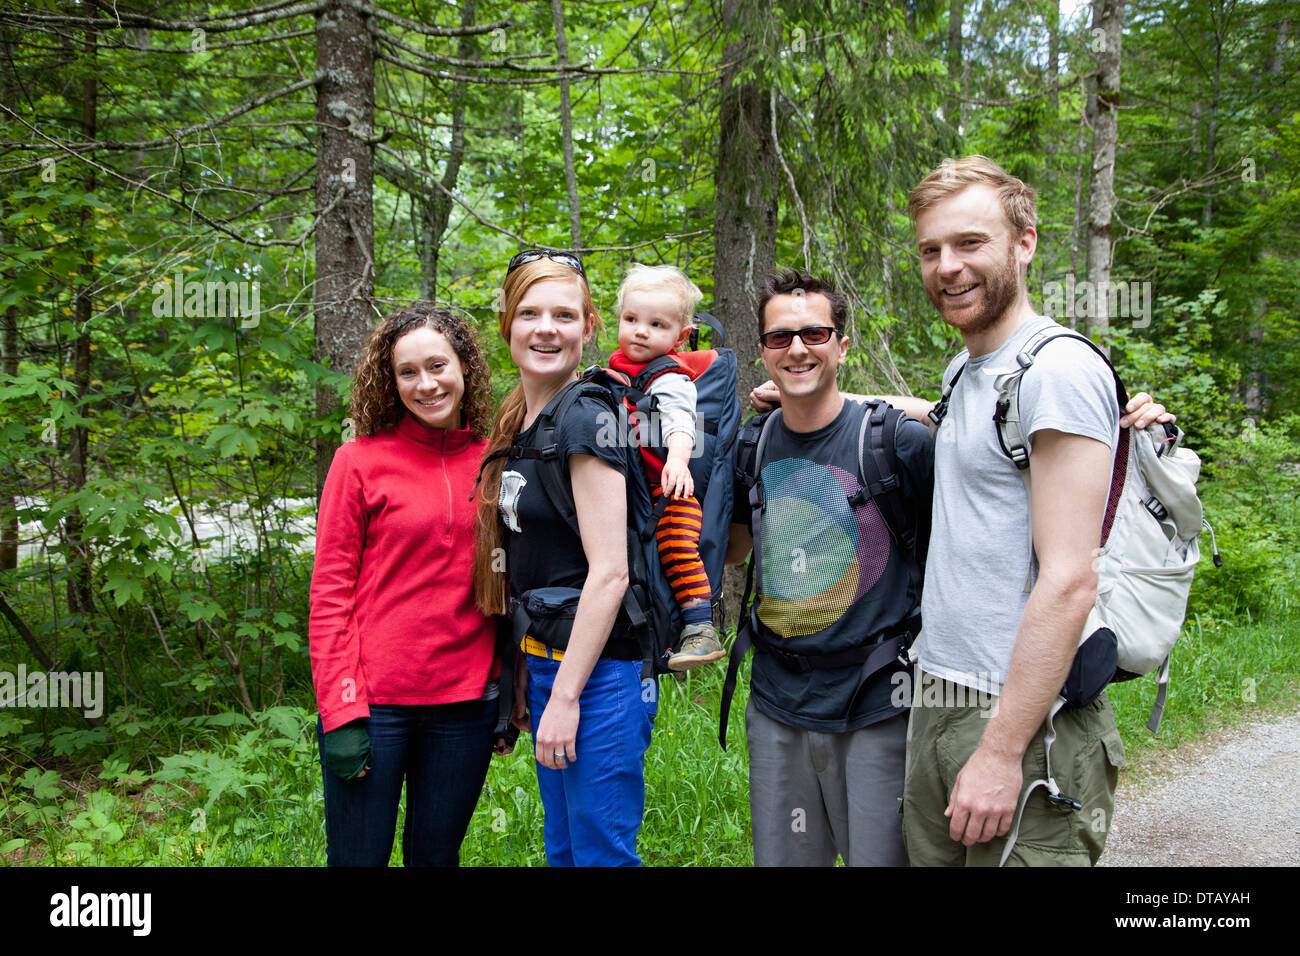 Family and friends in forest, smiling Stock Photo